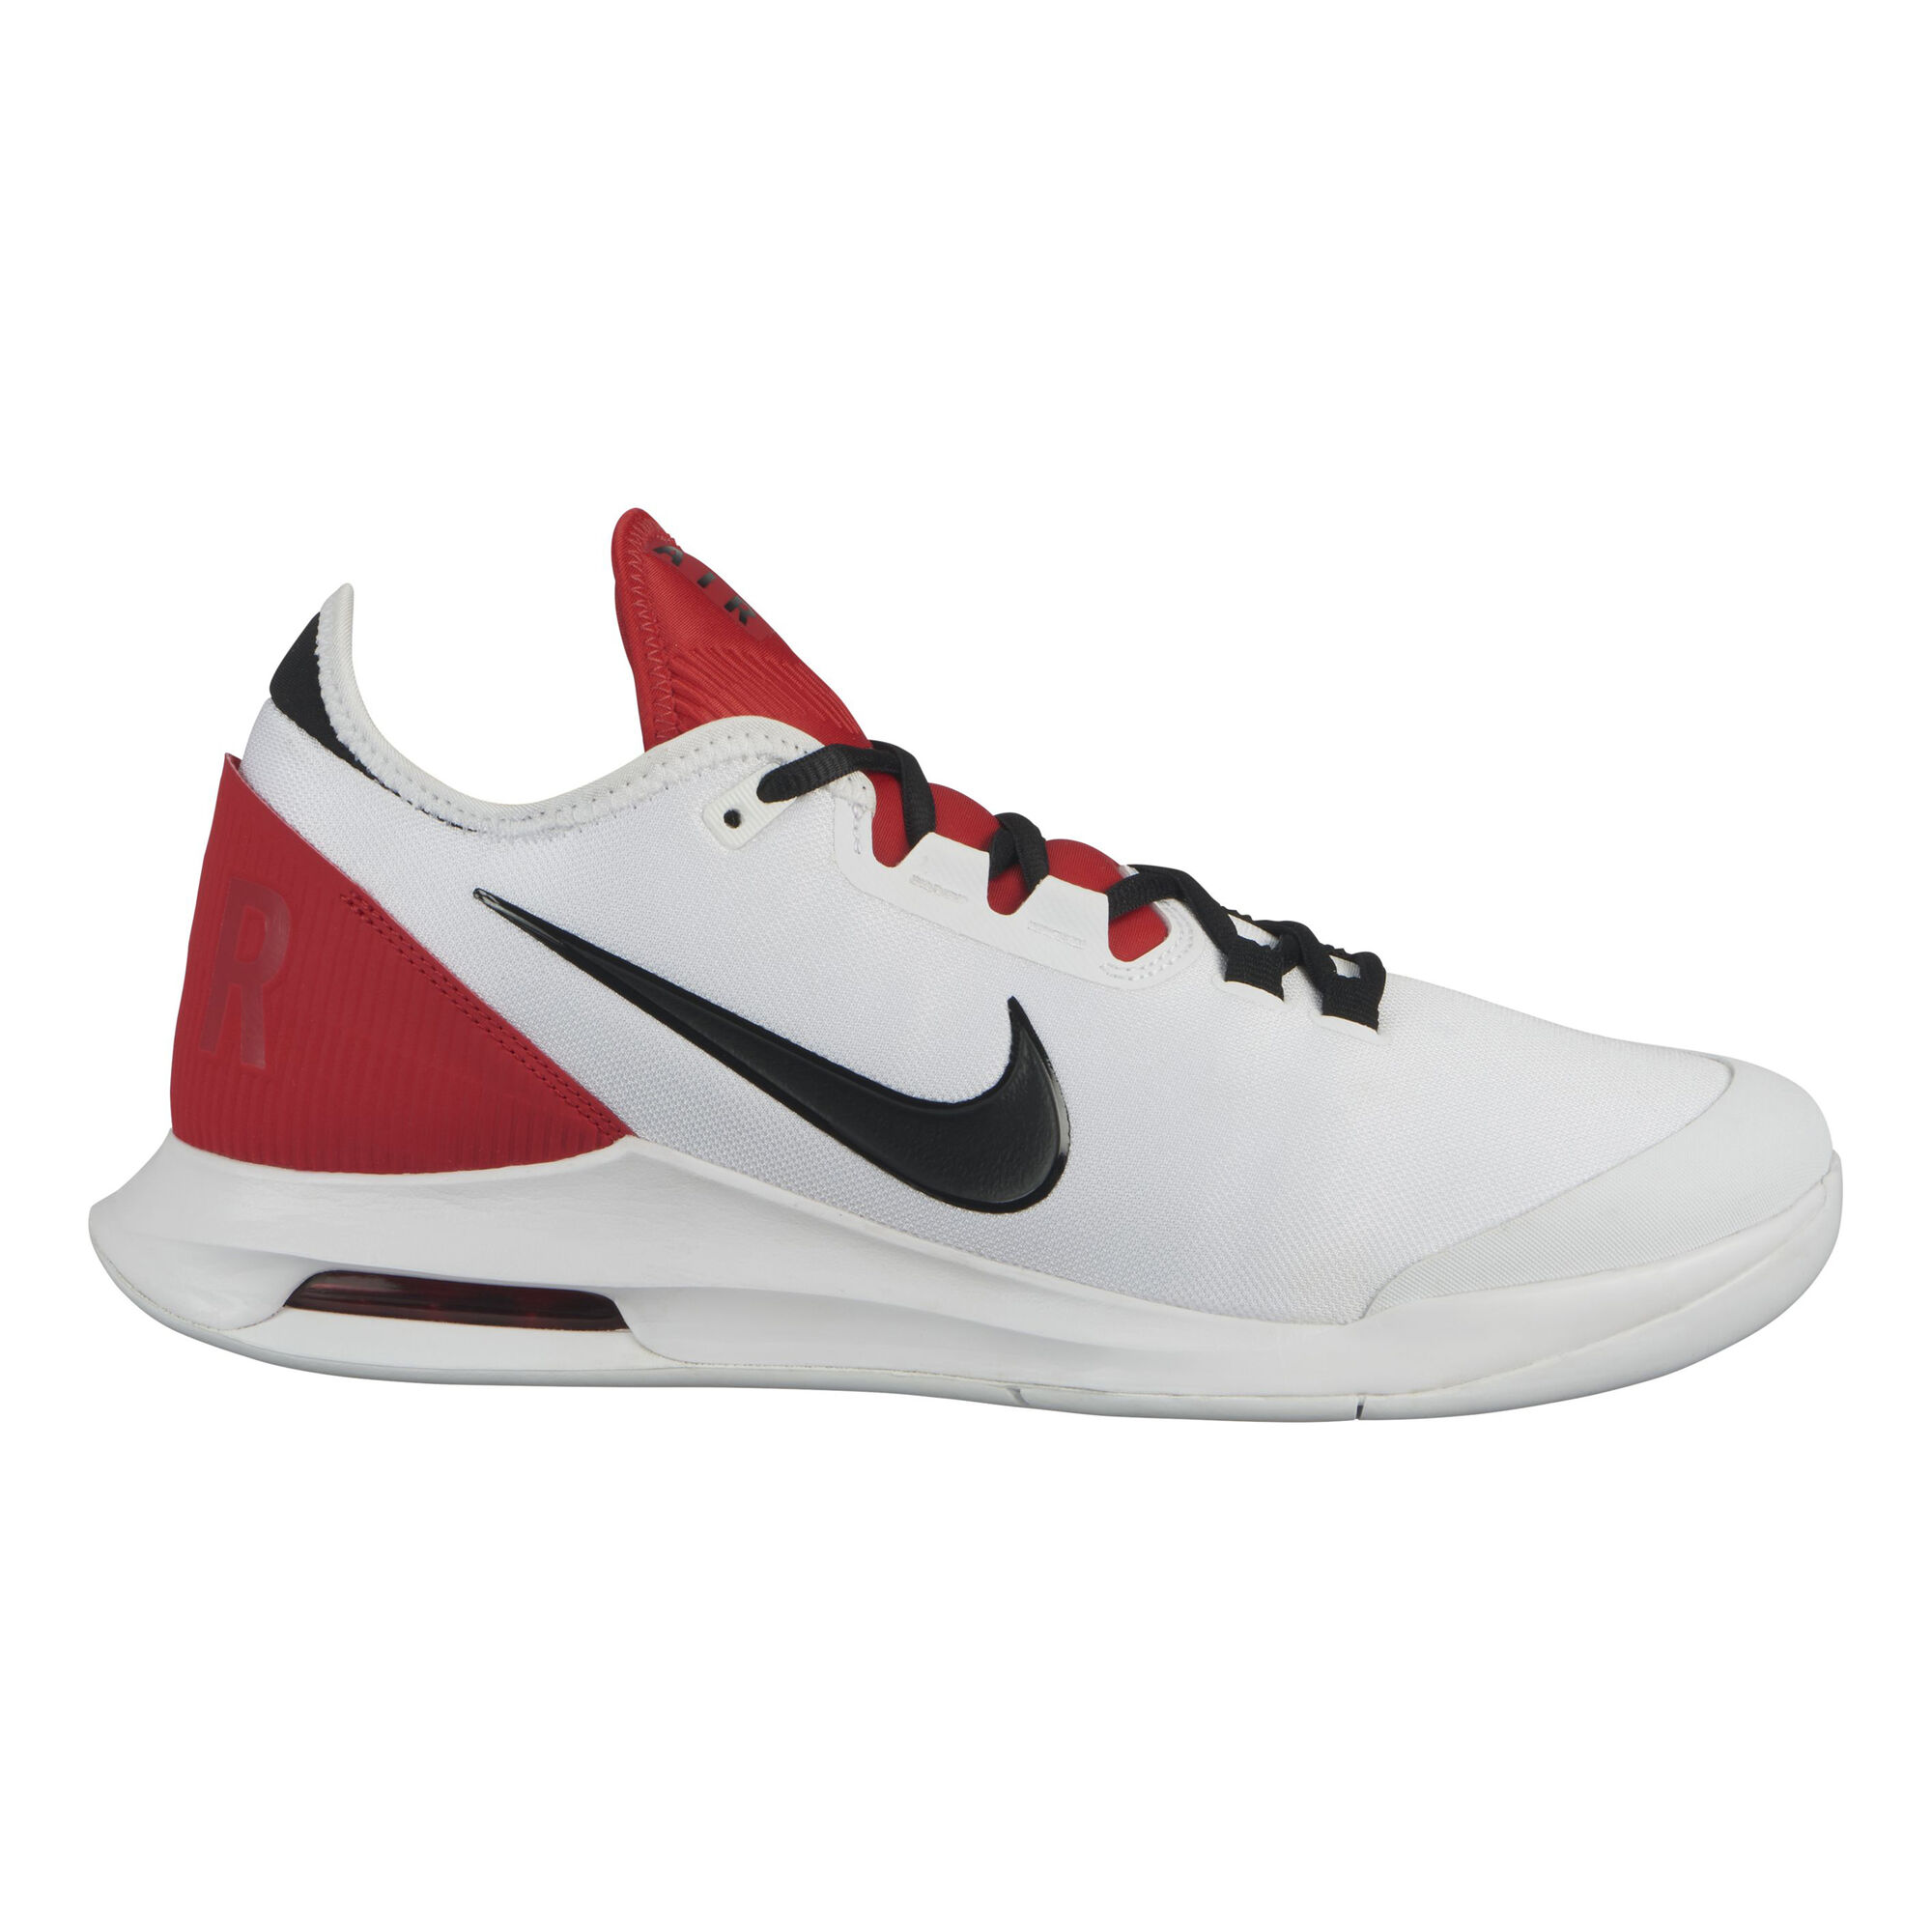 Buy Nike Air Max Wildcard All Court Shoe Men White, Red online | Tennis ...